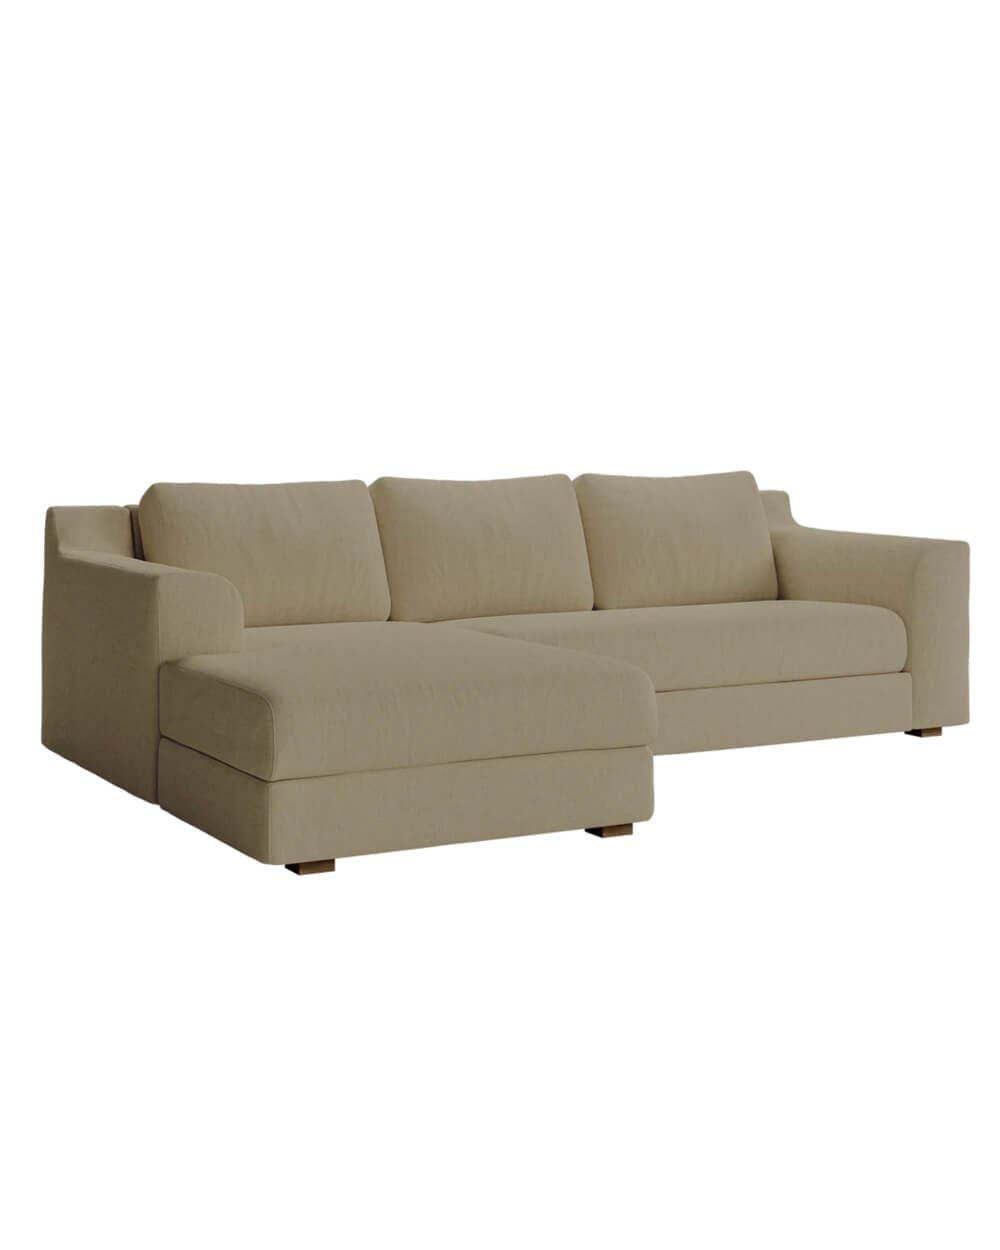 Sabai The Elevate Sectional